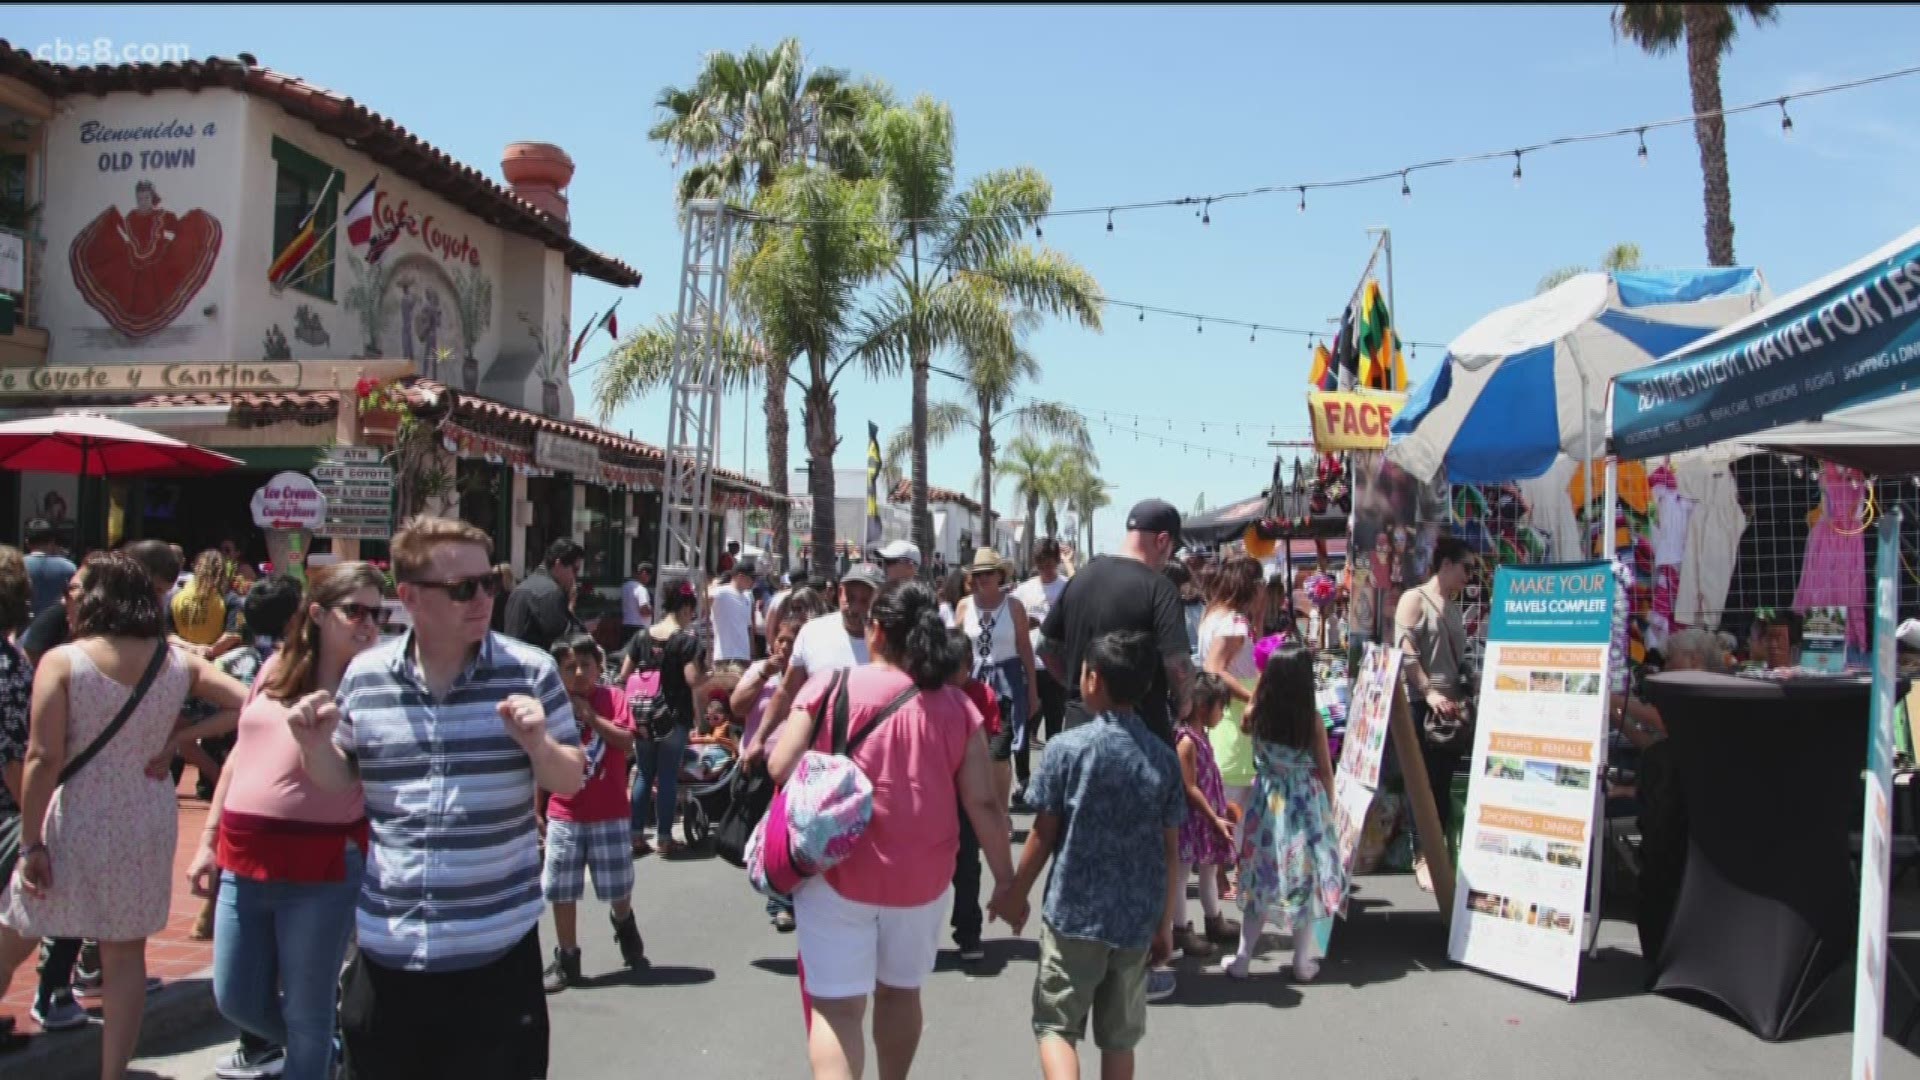 A free family event filled with food, drinks, historic games, entertainment, displays and activities on September 14-15 at Old Town San Diego